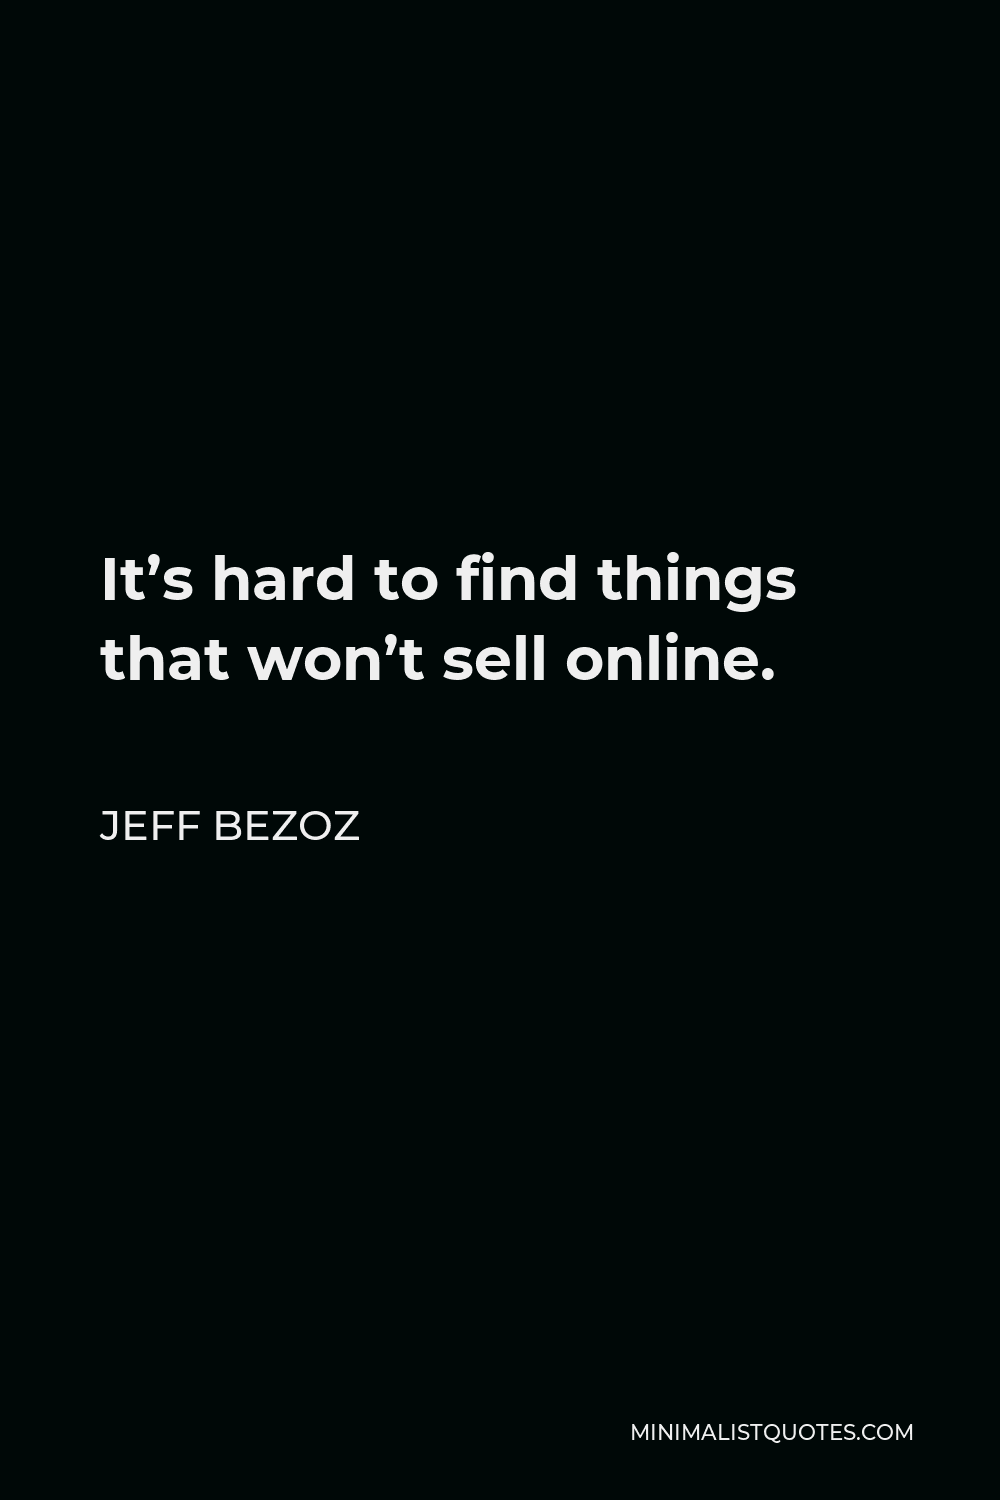 Jeff Bezoz Quote - It’s hard to find things that won’t sell online.